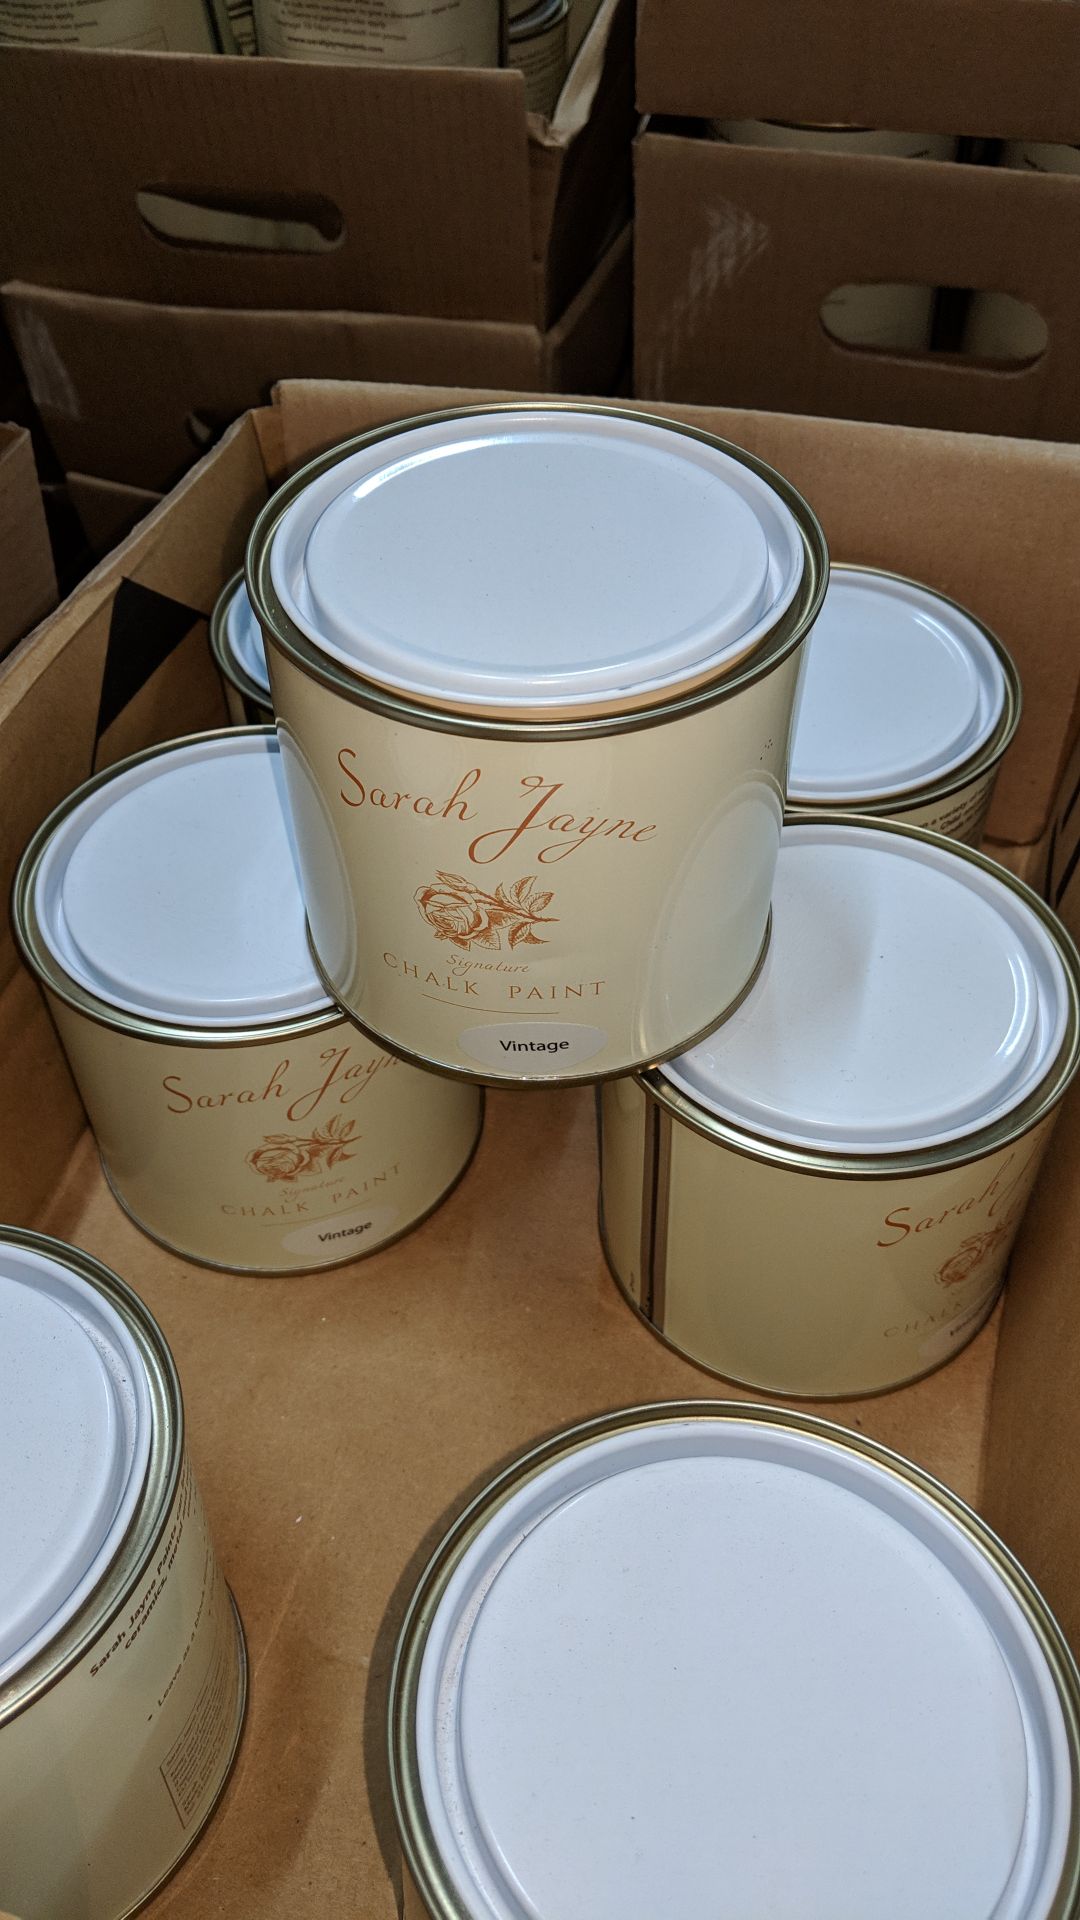 28 off 500ml tins of Sarah Jayne signature chalk paint - colour Vintage This lot is one of a - Image 2 of 2